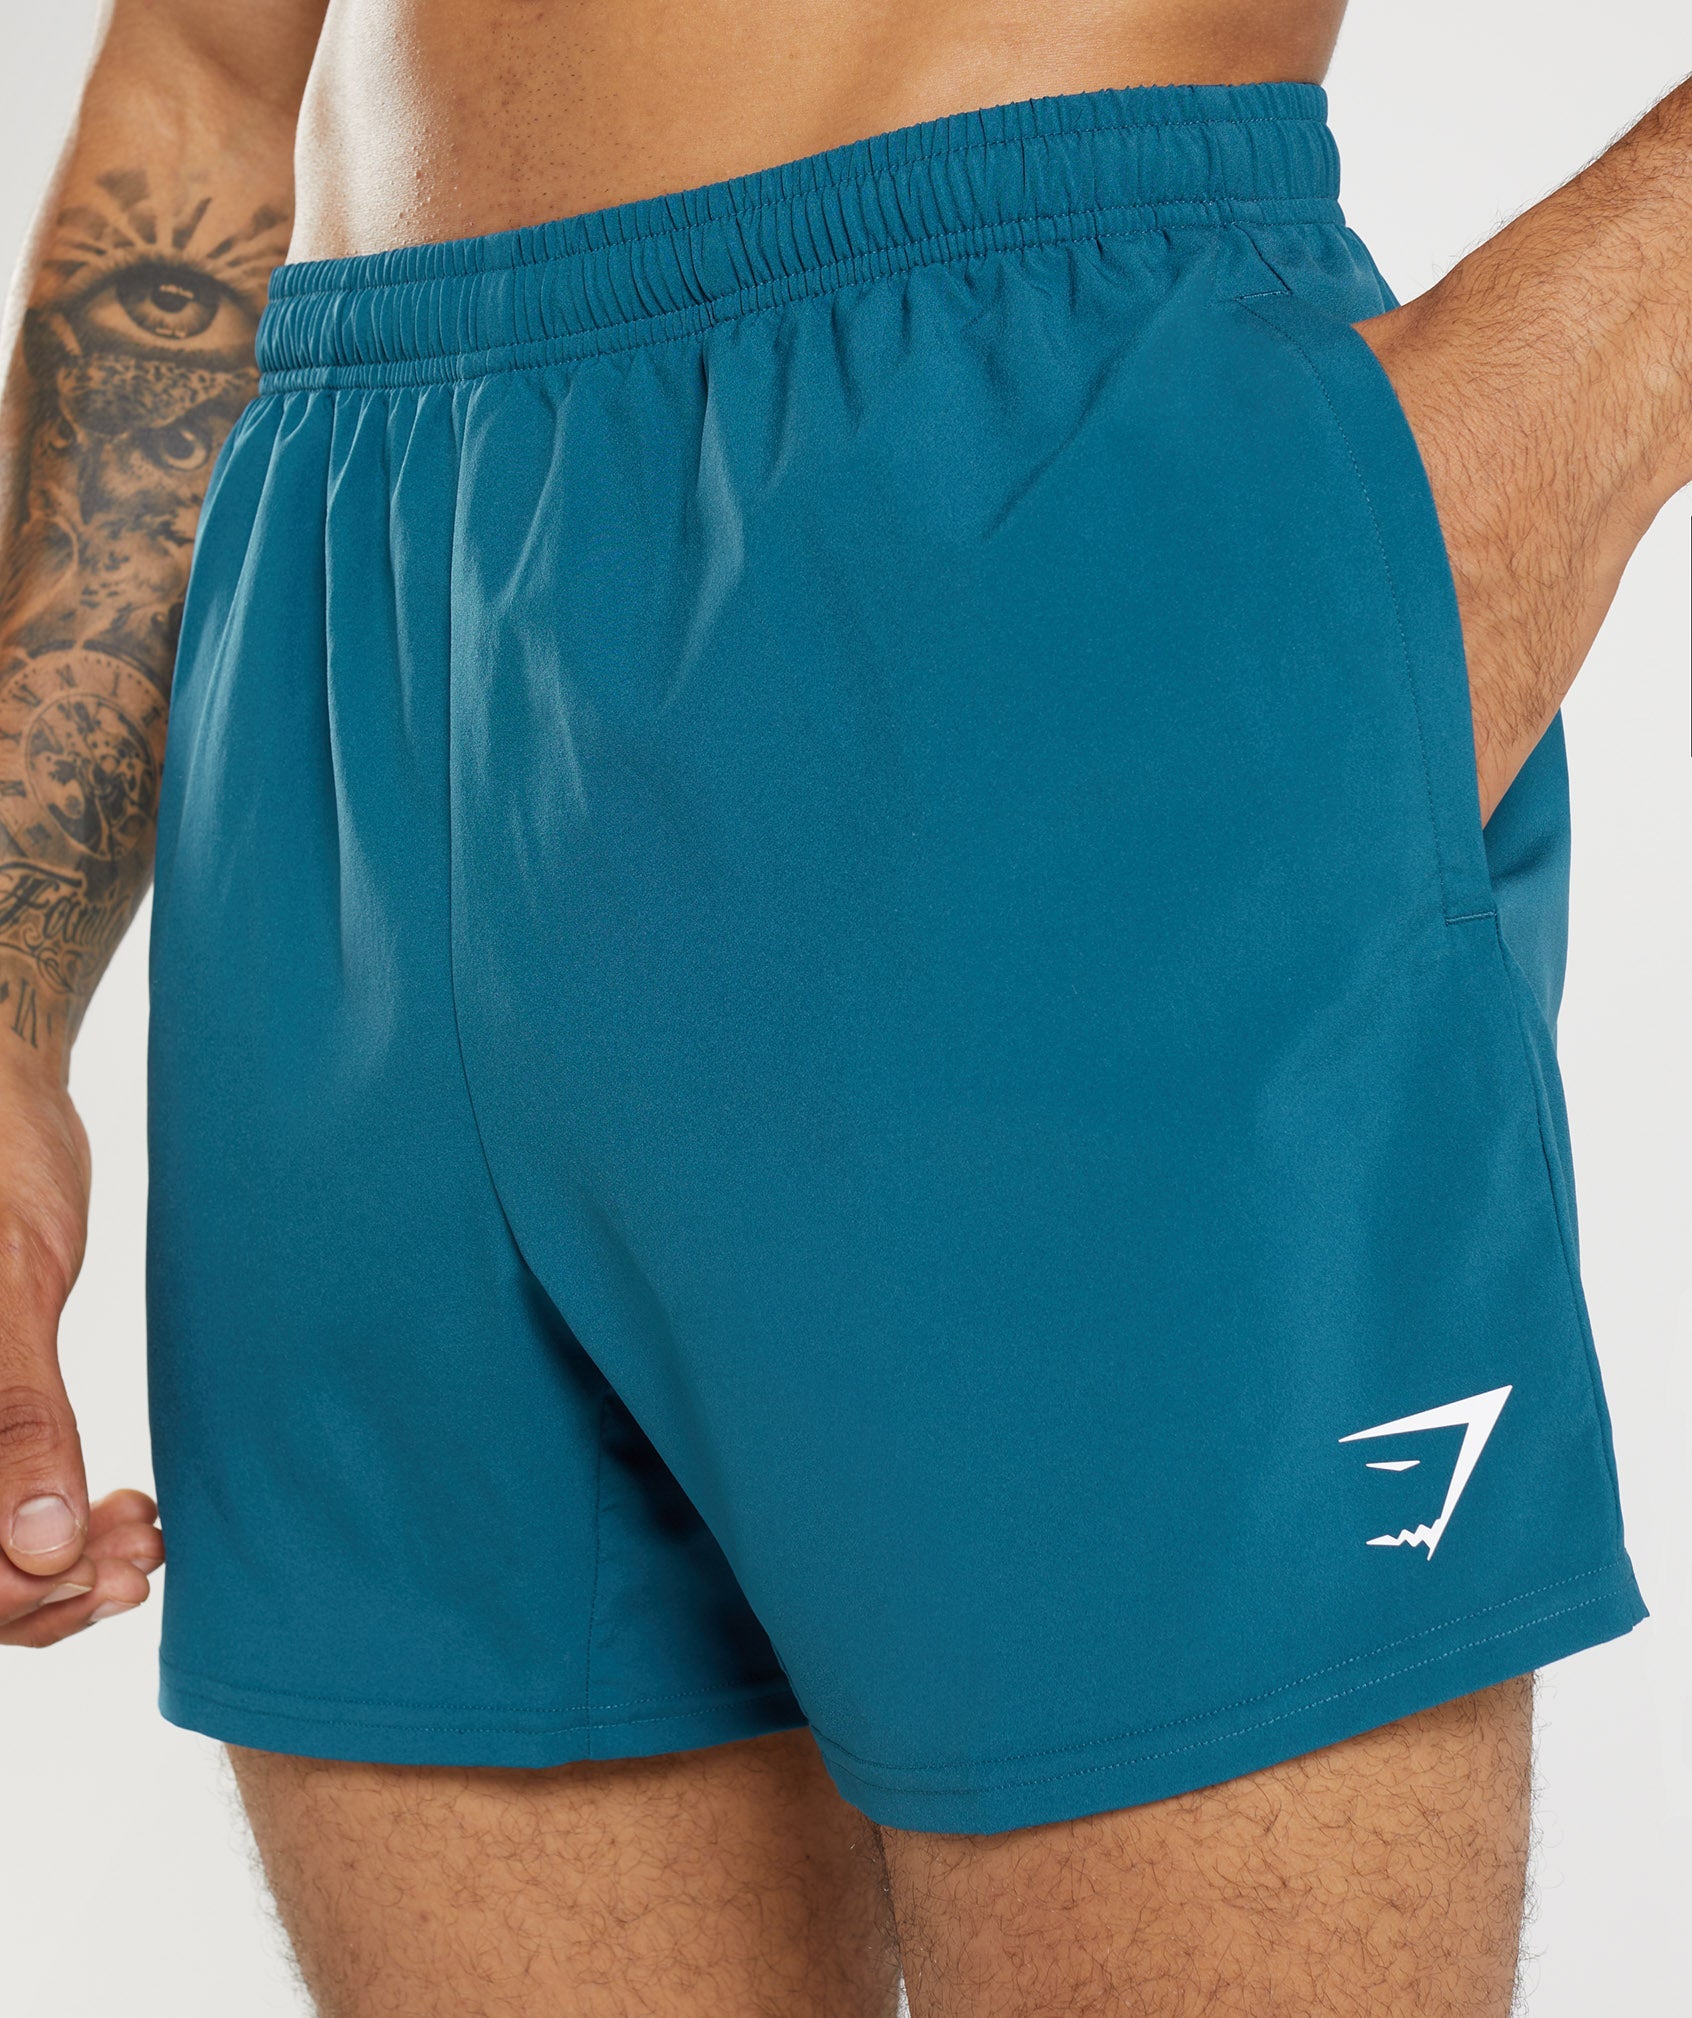 Arrival 5" Shorts in Atlantic Blue - view 3